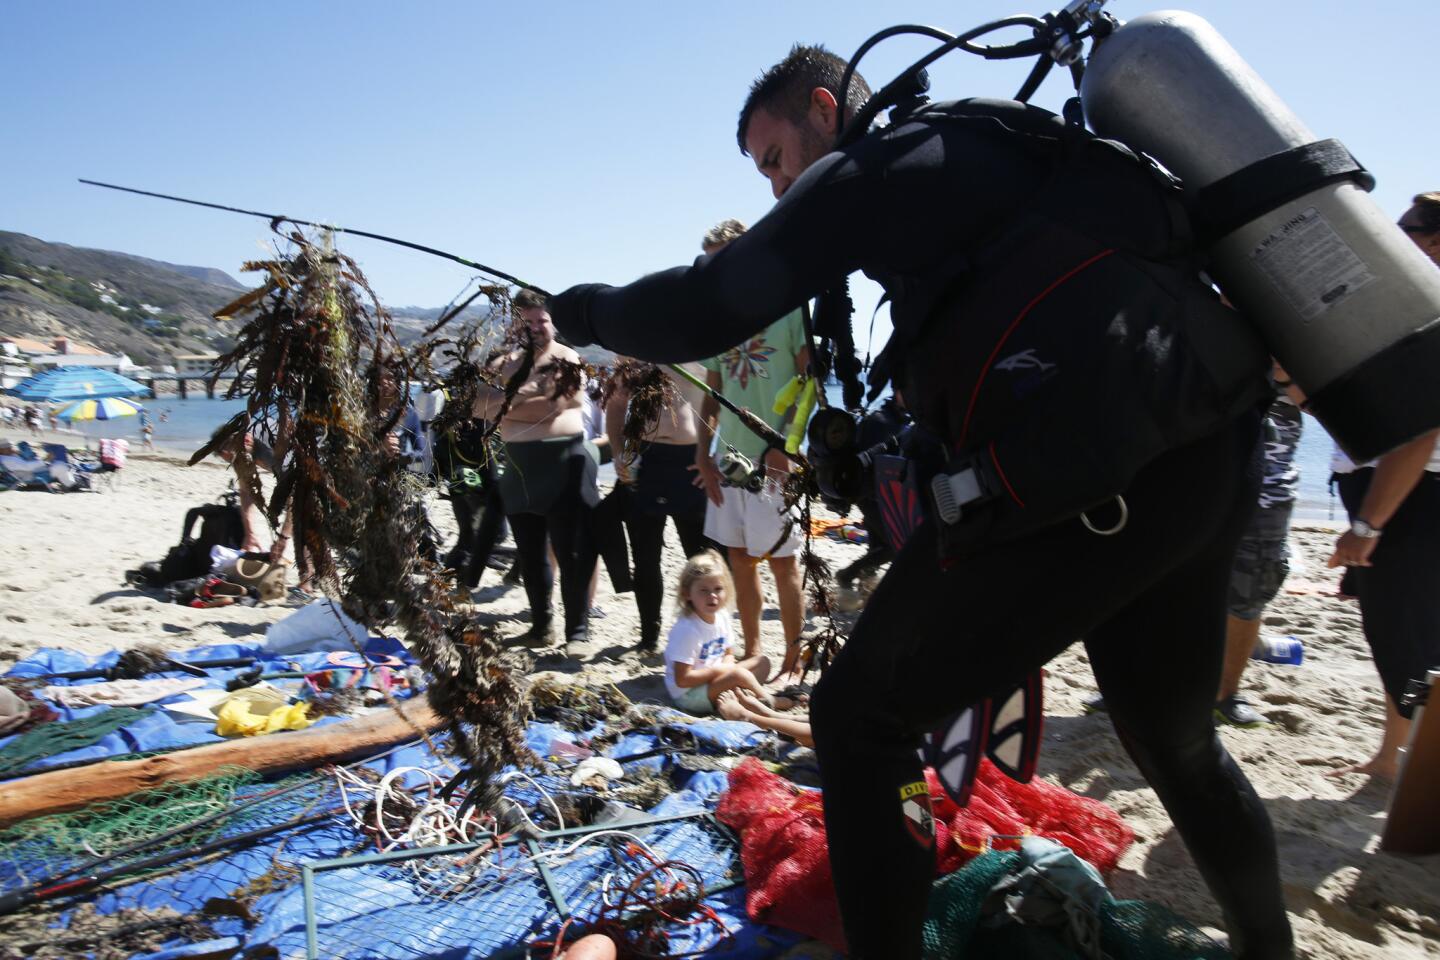 Jason Zigler lays down a fishing pole along with the 15 pounds of trash he found during Coastal Cleanup Day in Malibu.